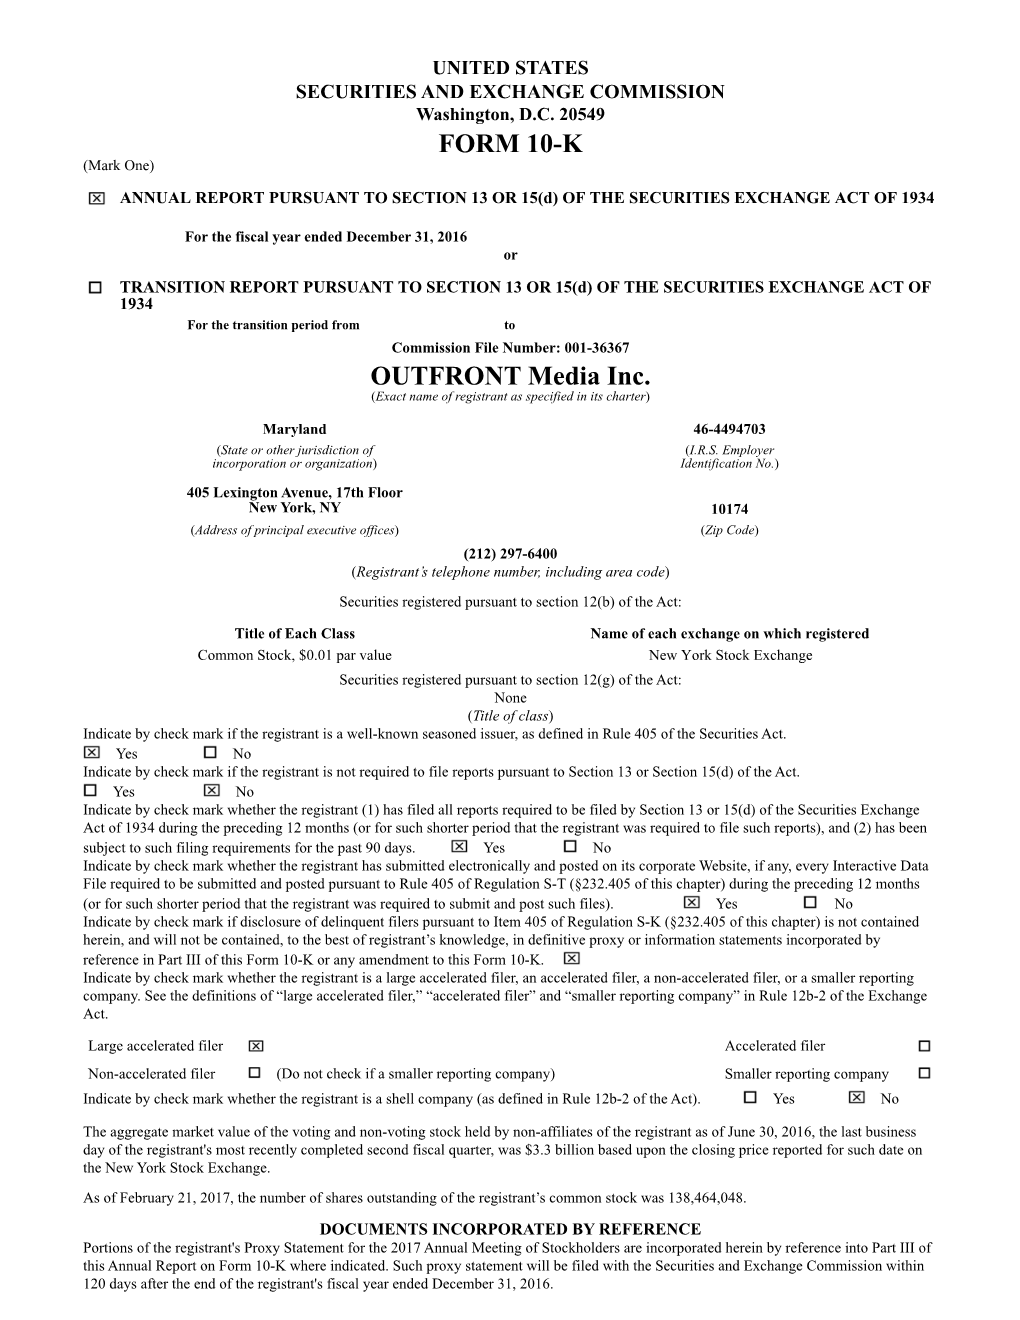 FORM 10-K OUTFRONT Media Inc